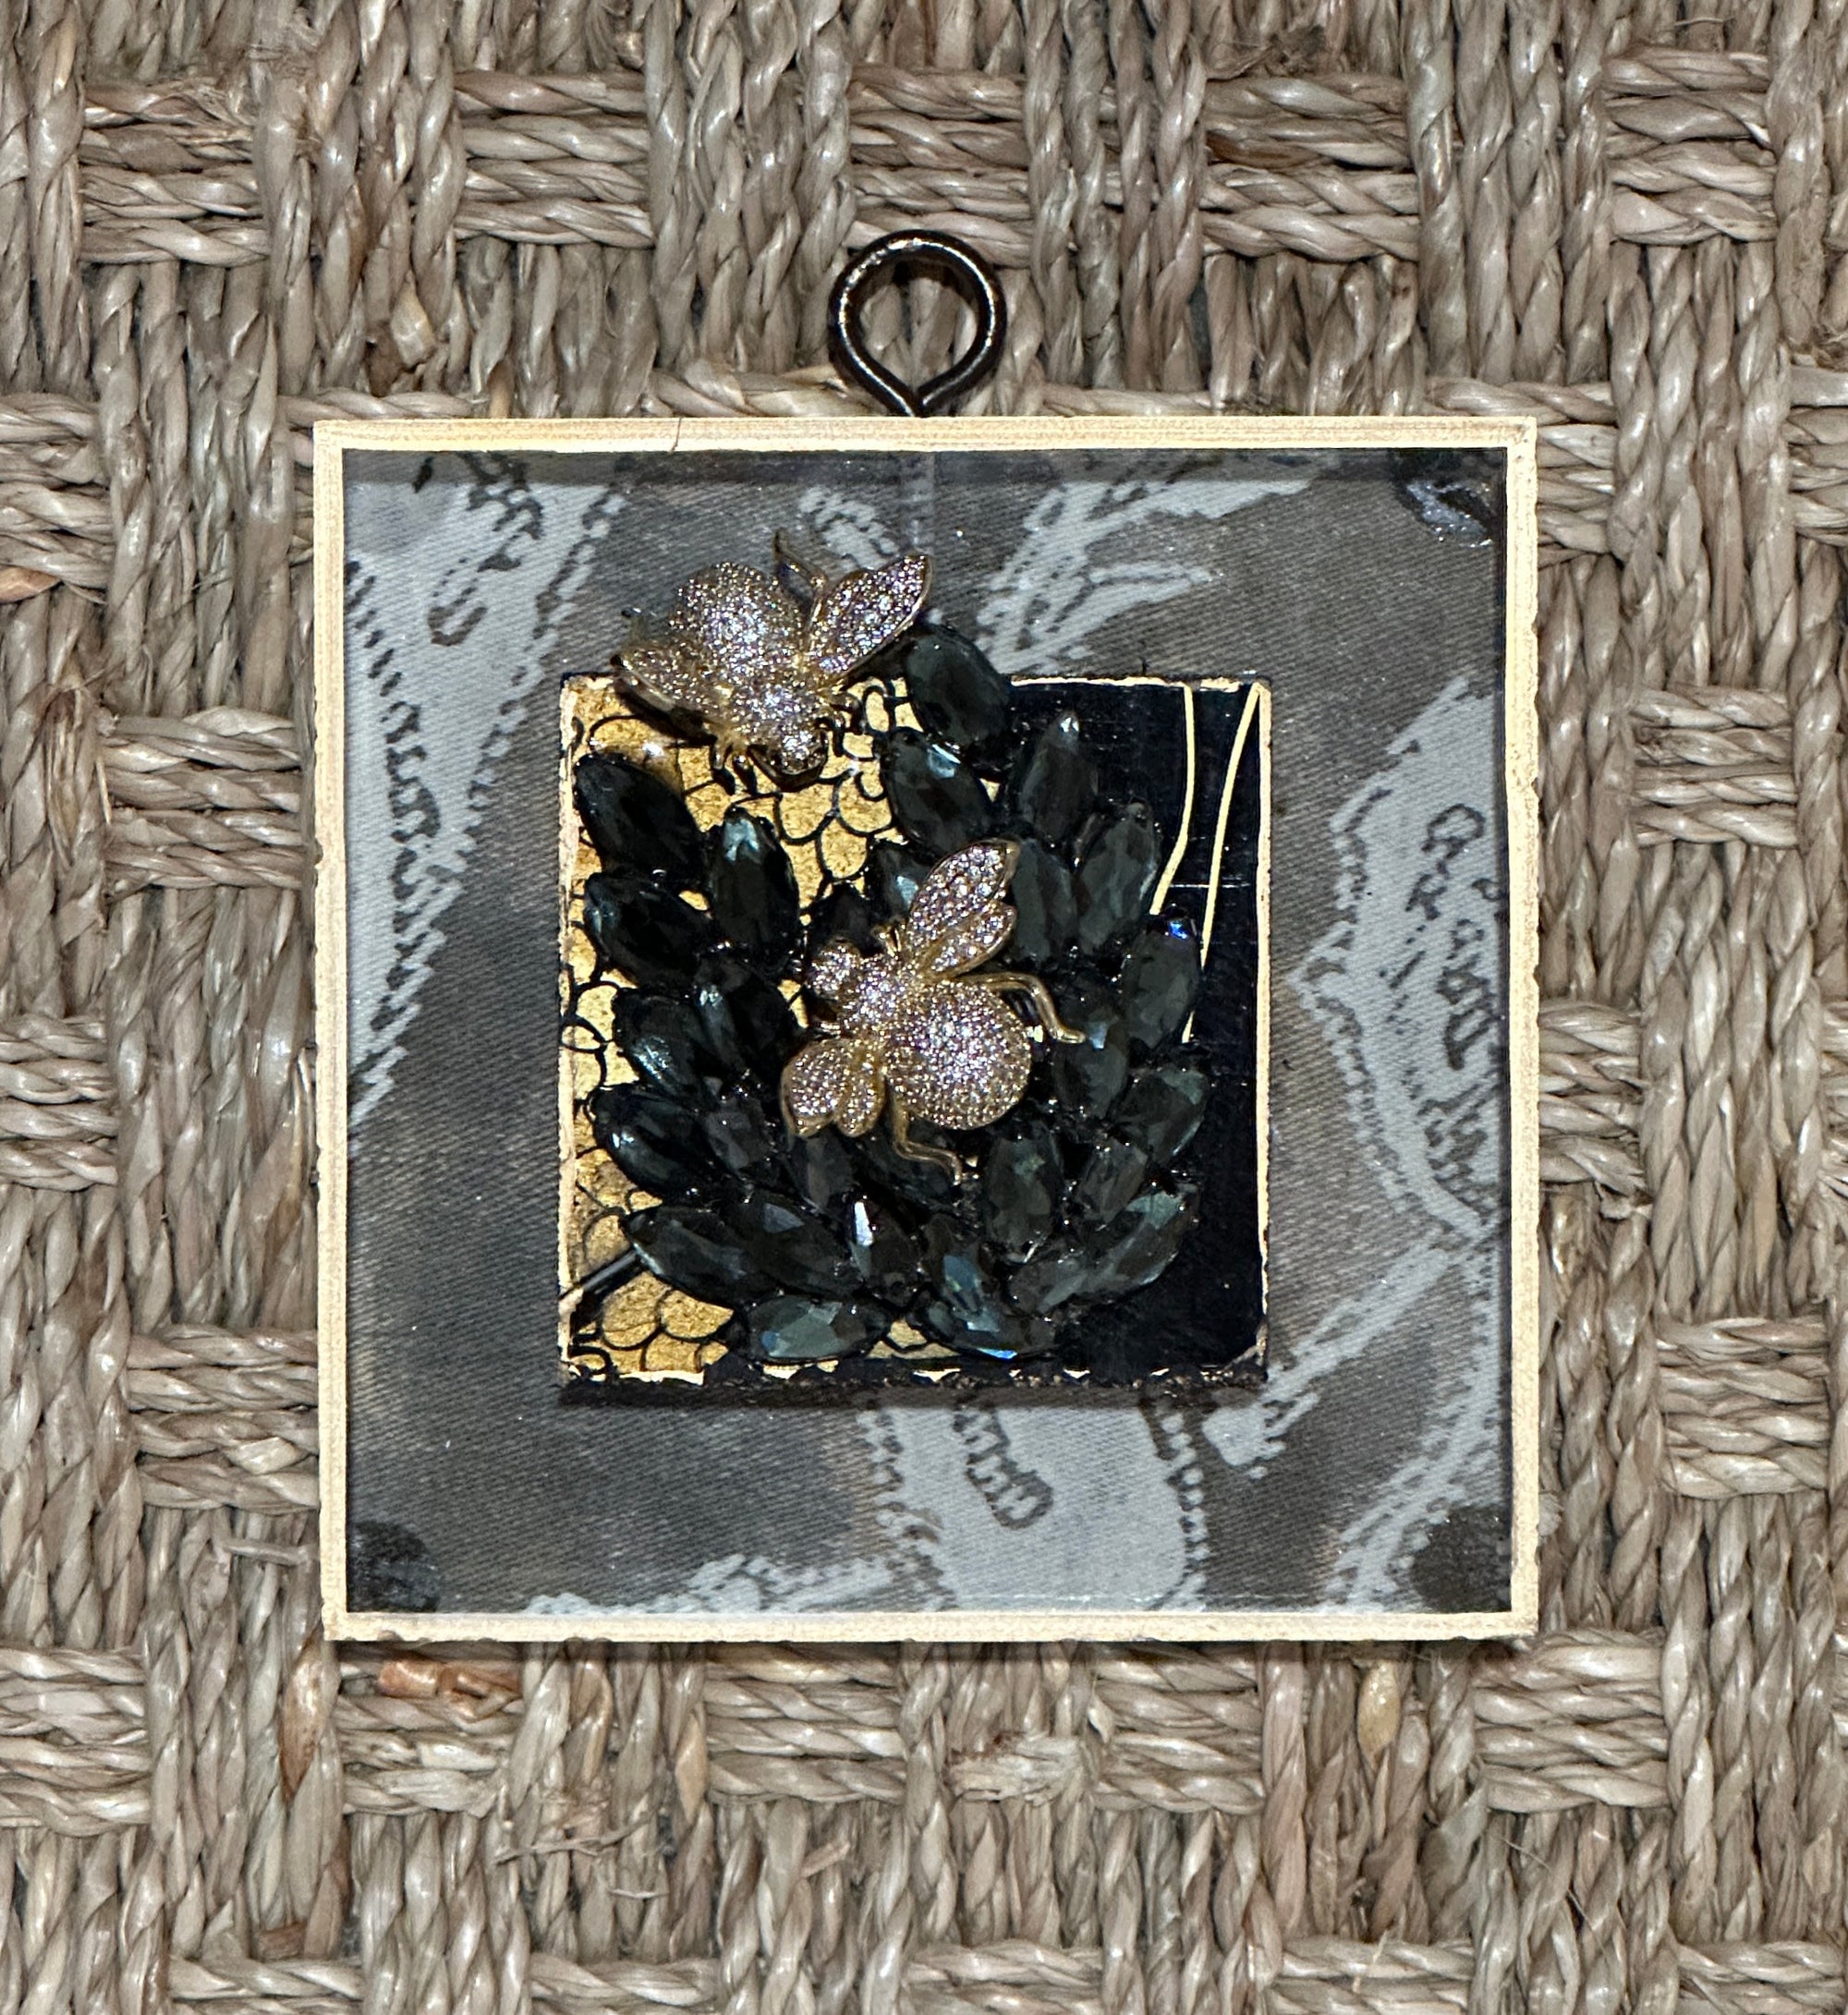 Museum Bee, Fortuny Fabric Backed Acrylic Frame with Sparkle Bees and Brooch on Coromandel